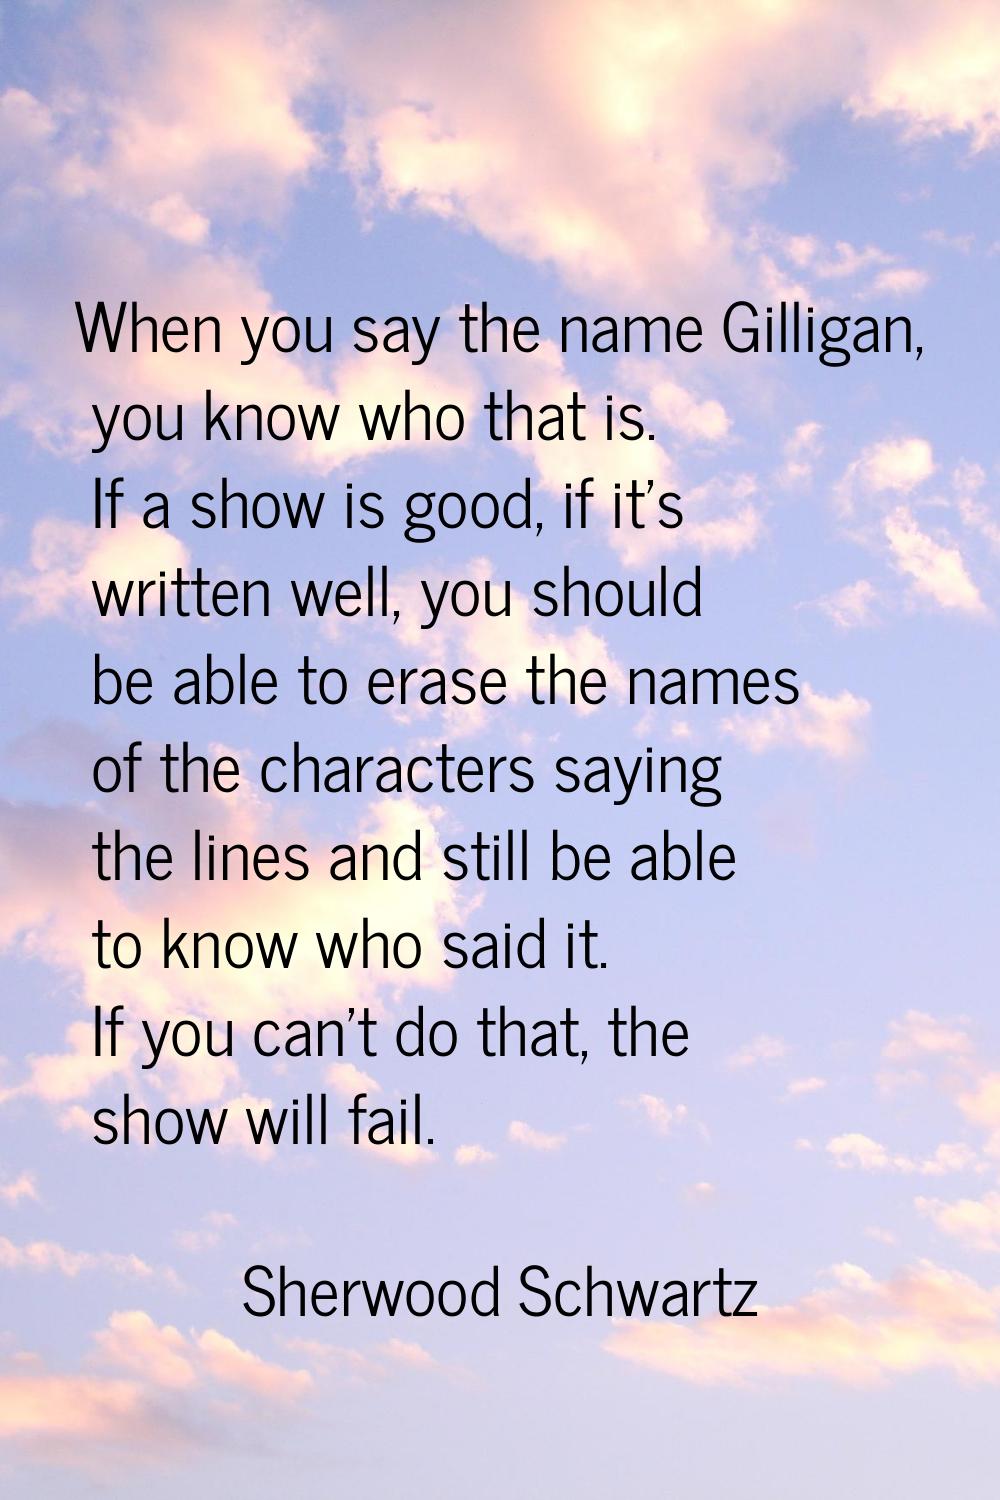 When you say the name Gilligan, you know who that is. If a show is good, if it's written well, you 